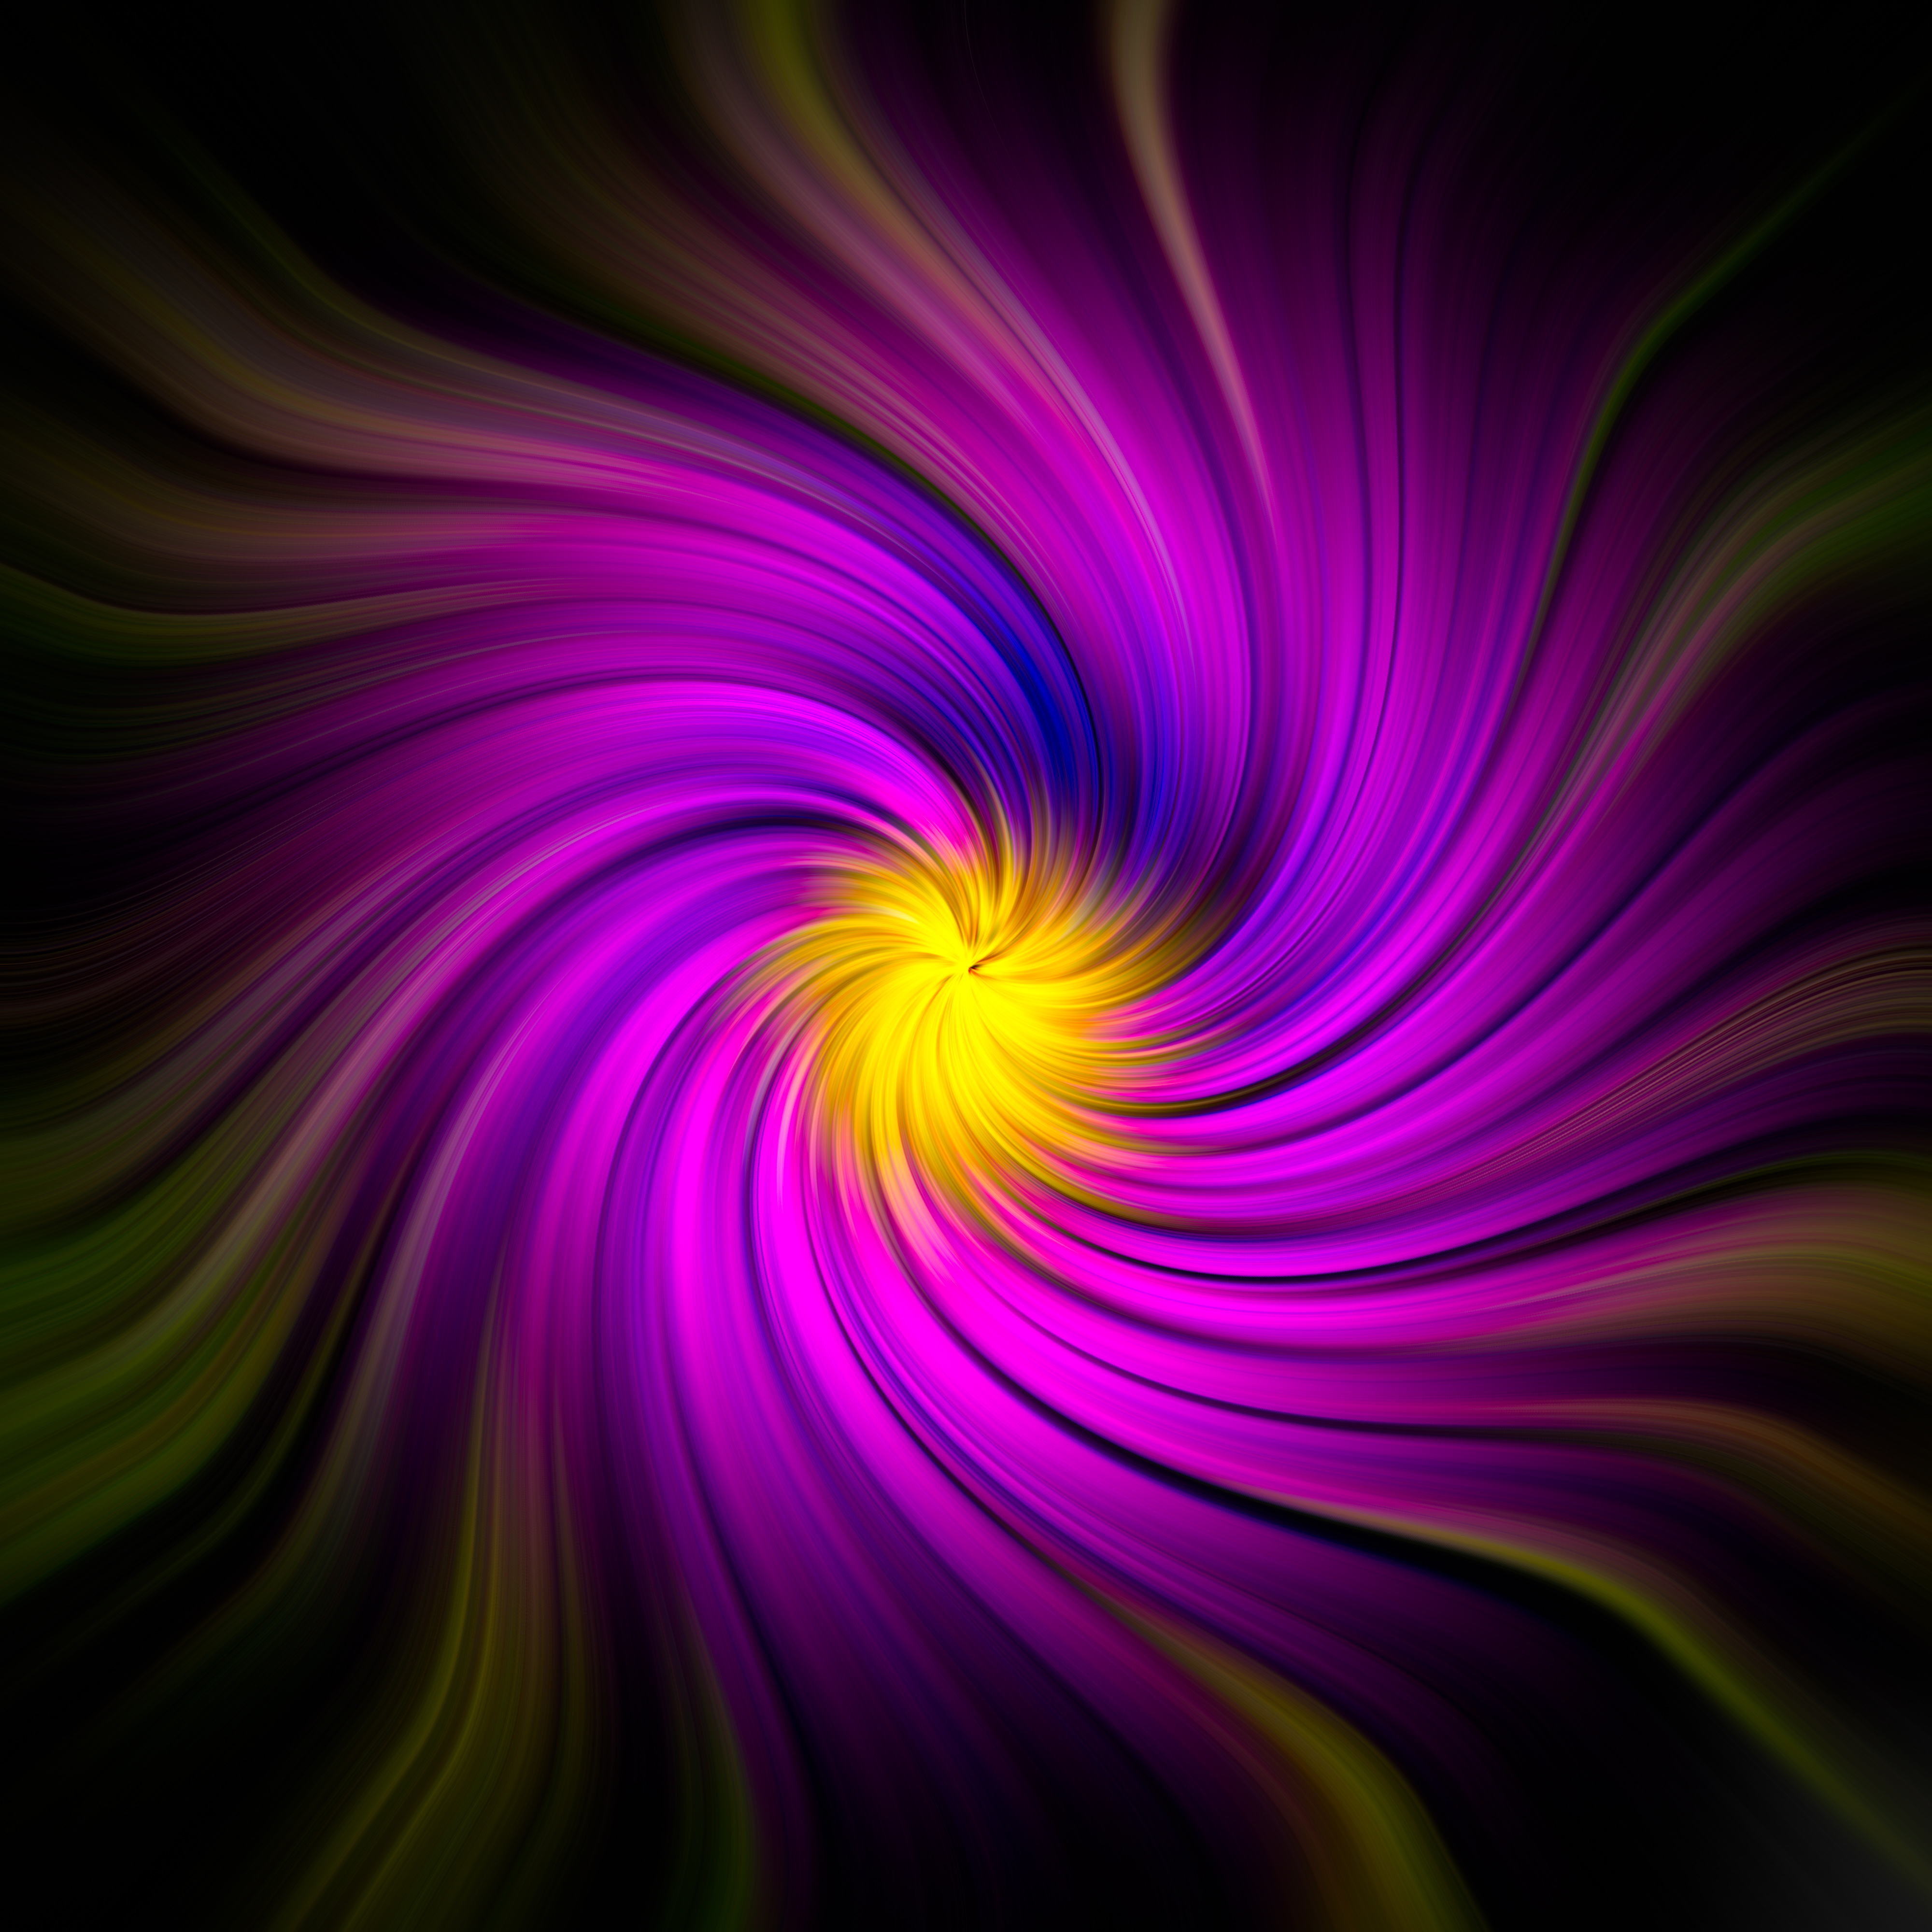 rotation, abstract, violet, fractal, purple, swirling, involute download HD wallpaper